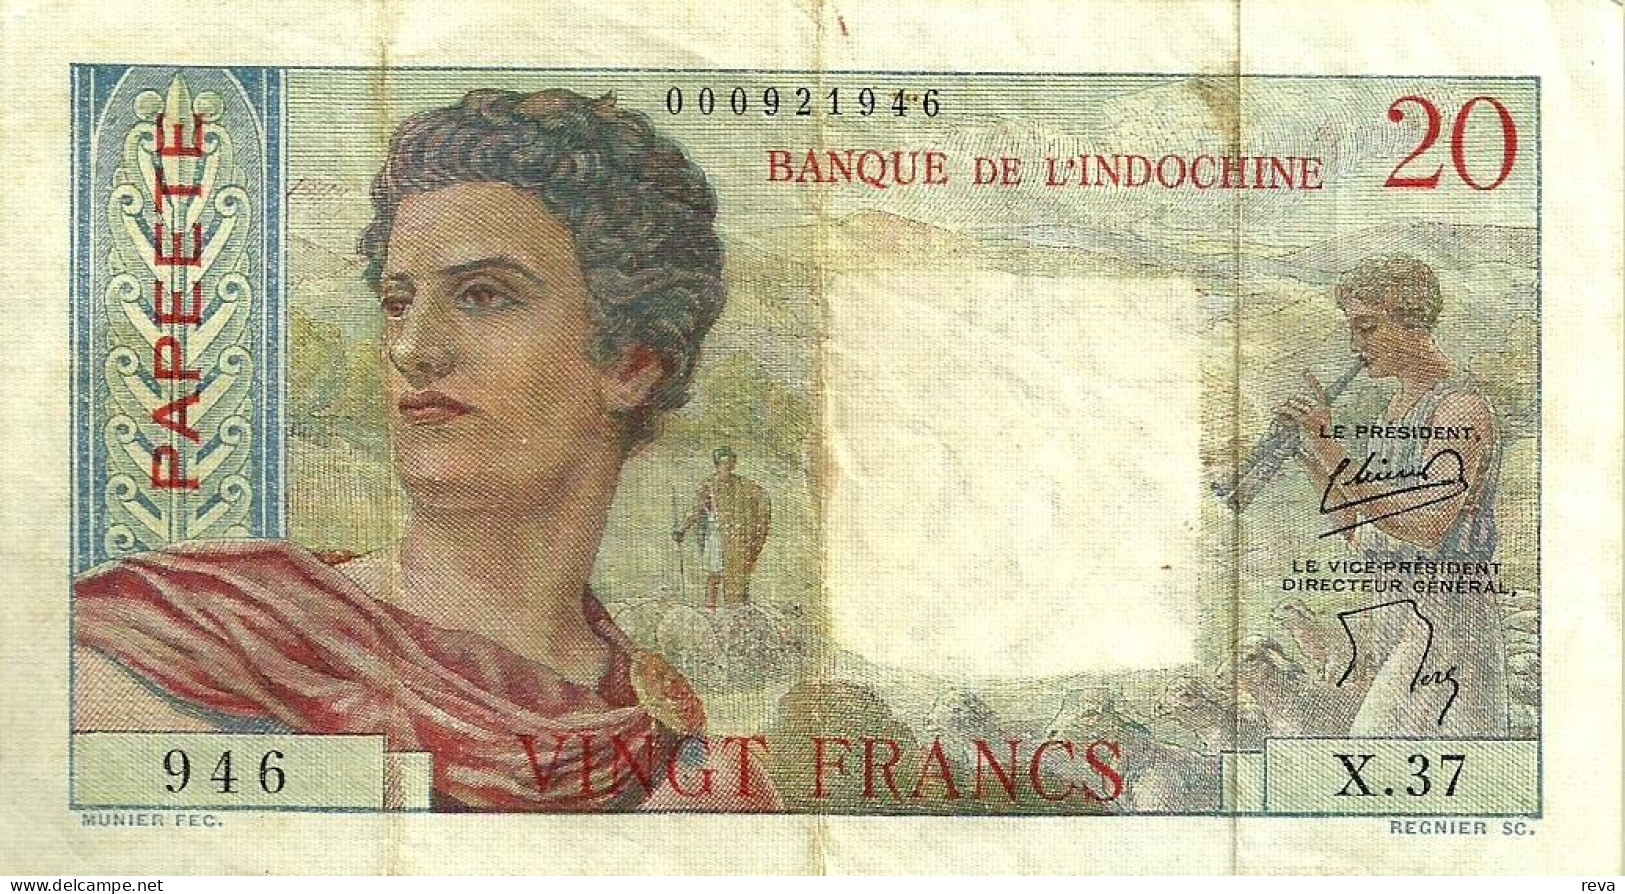 FRENCH POLYNESIA 20 FRANCS GREY MAN HEAD FRONT WOMAN BACK NOT DATED(1963) P21c 3RD SIG VARIETY VF+ READ DESCRIPTION!! - Papeete (French Polynesia 1914-1985)